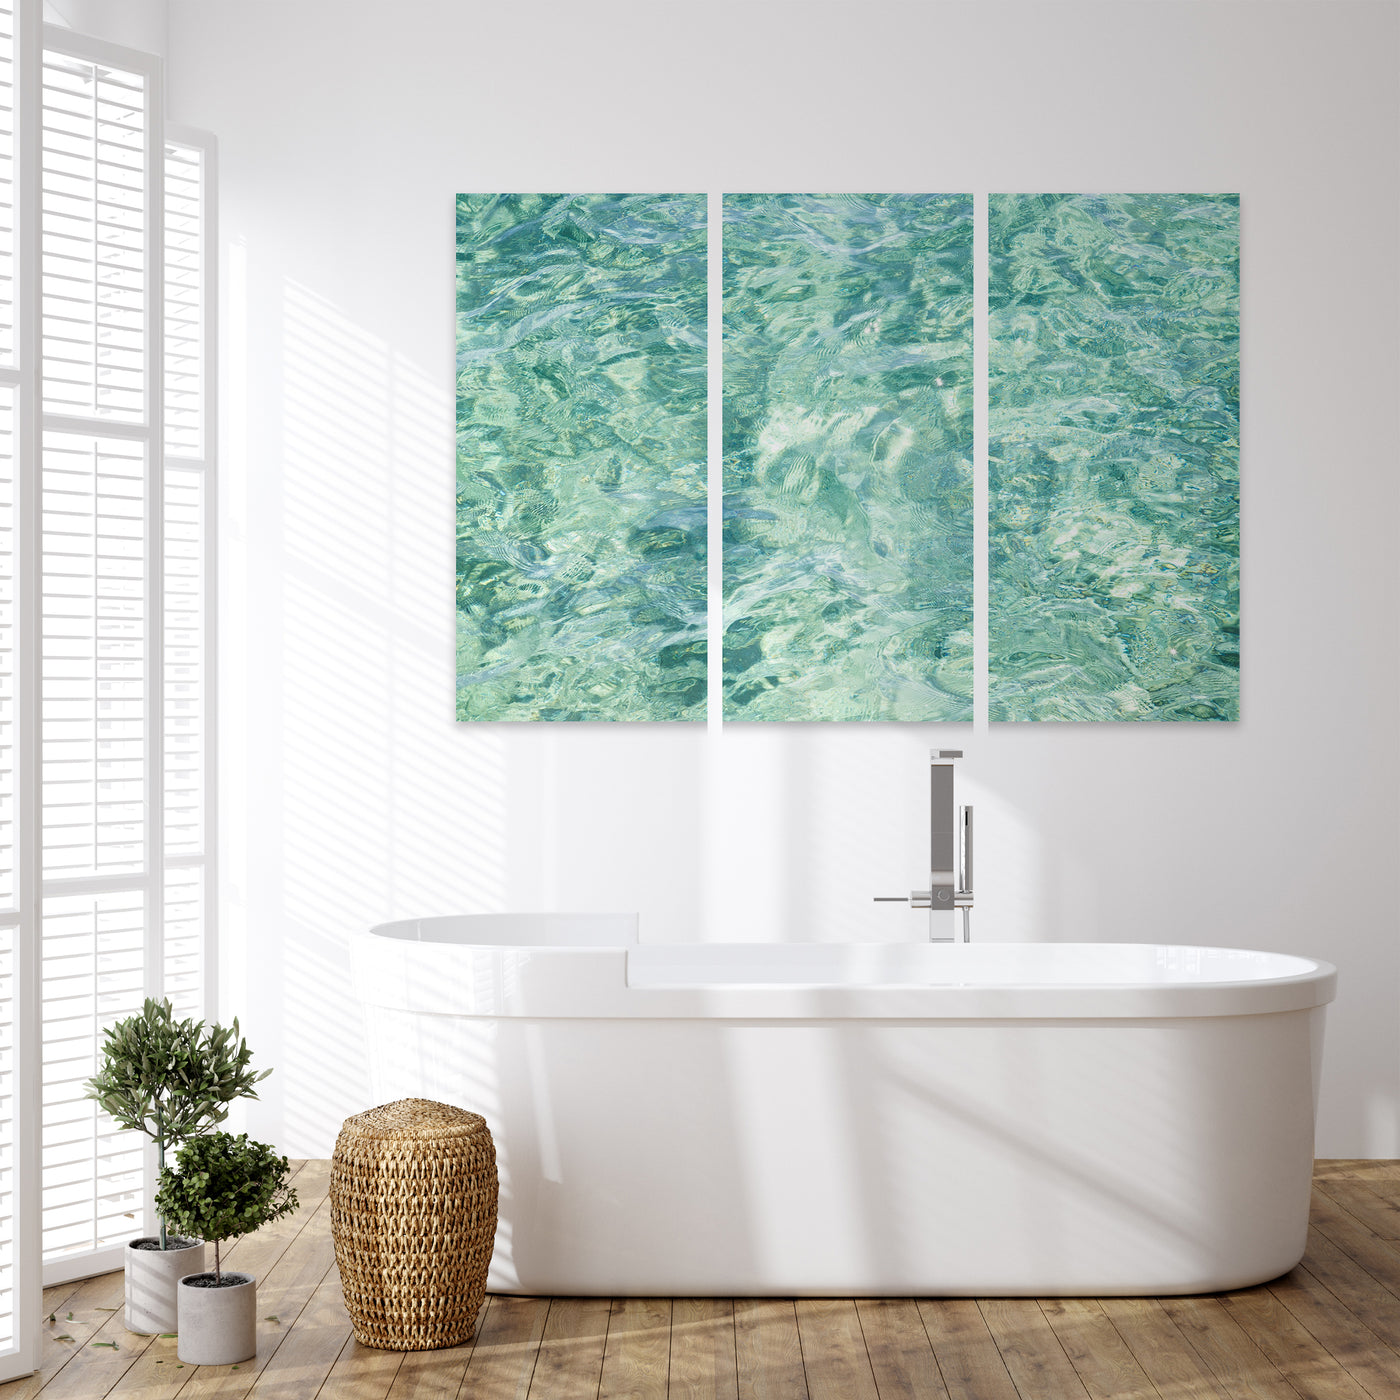 3 piece wall art - Abstract Water No 5 by Cattie Coyle Photography in bathroom